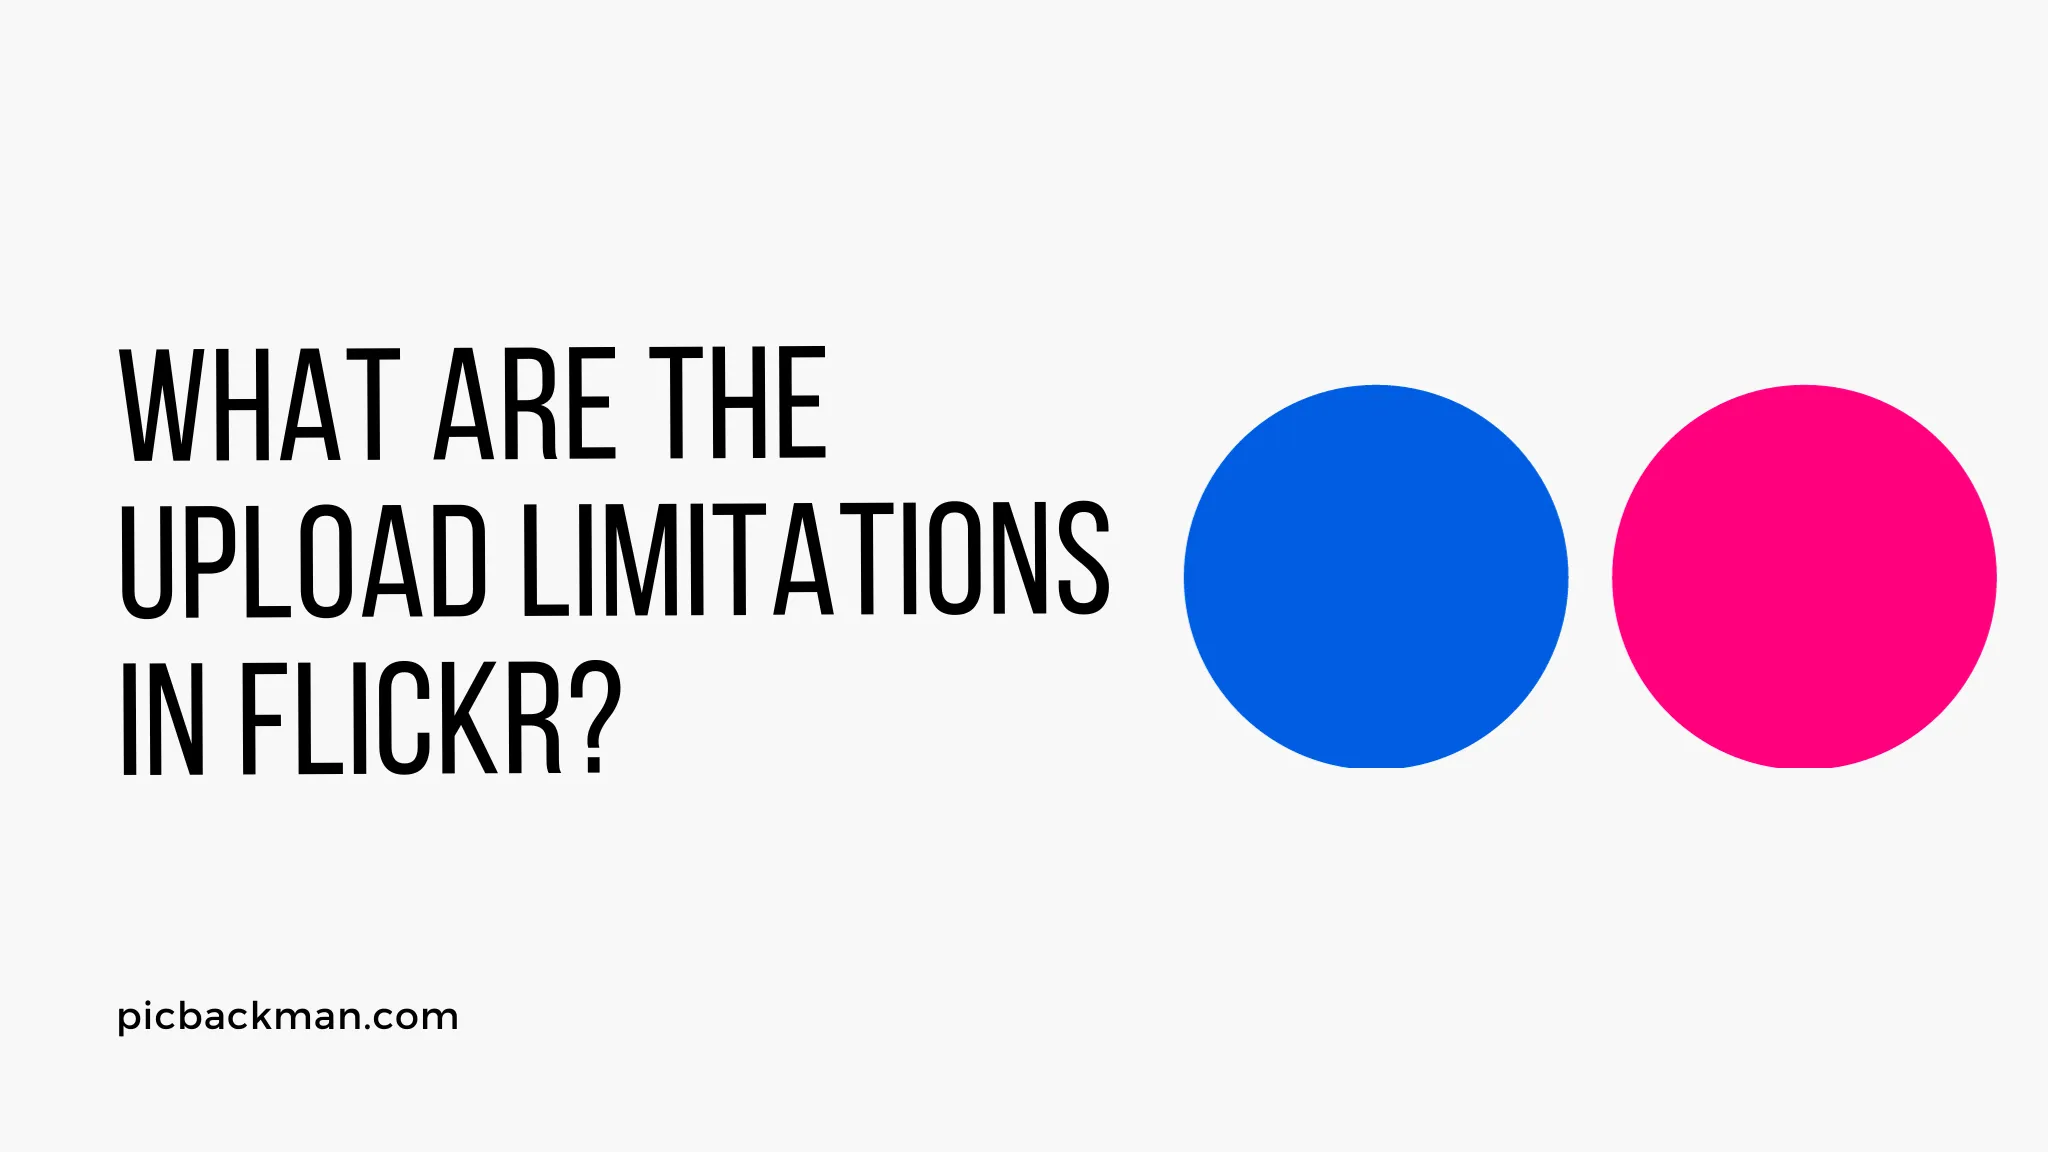 What are the Upload Limitations in Flickr?